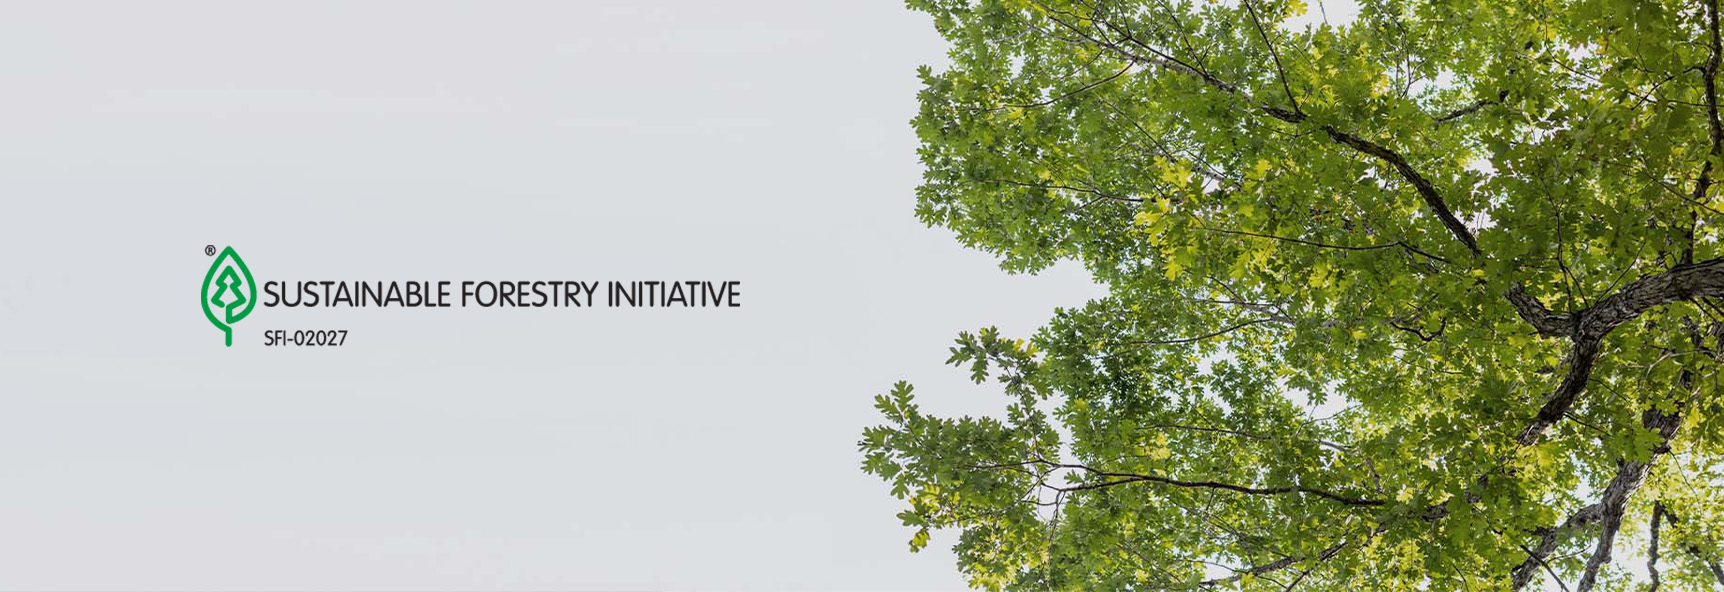 Featured Image for “Sustainable Forestry Initiative”